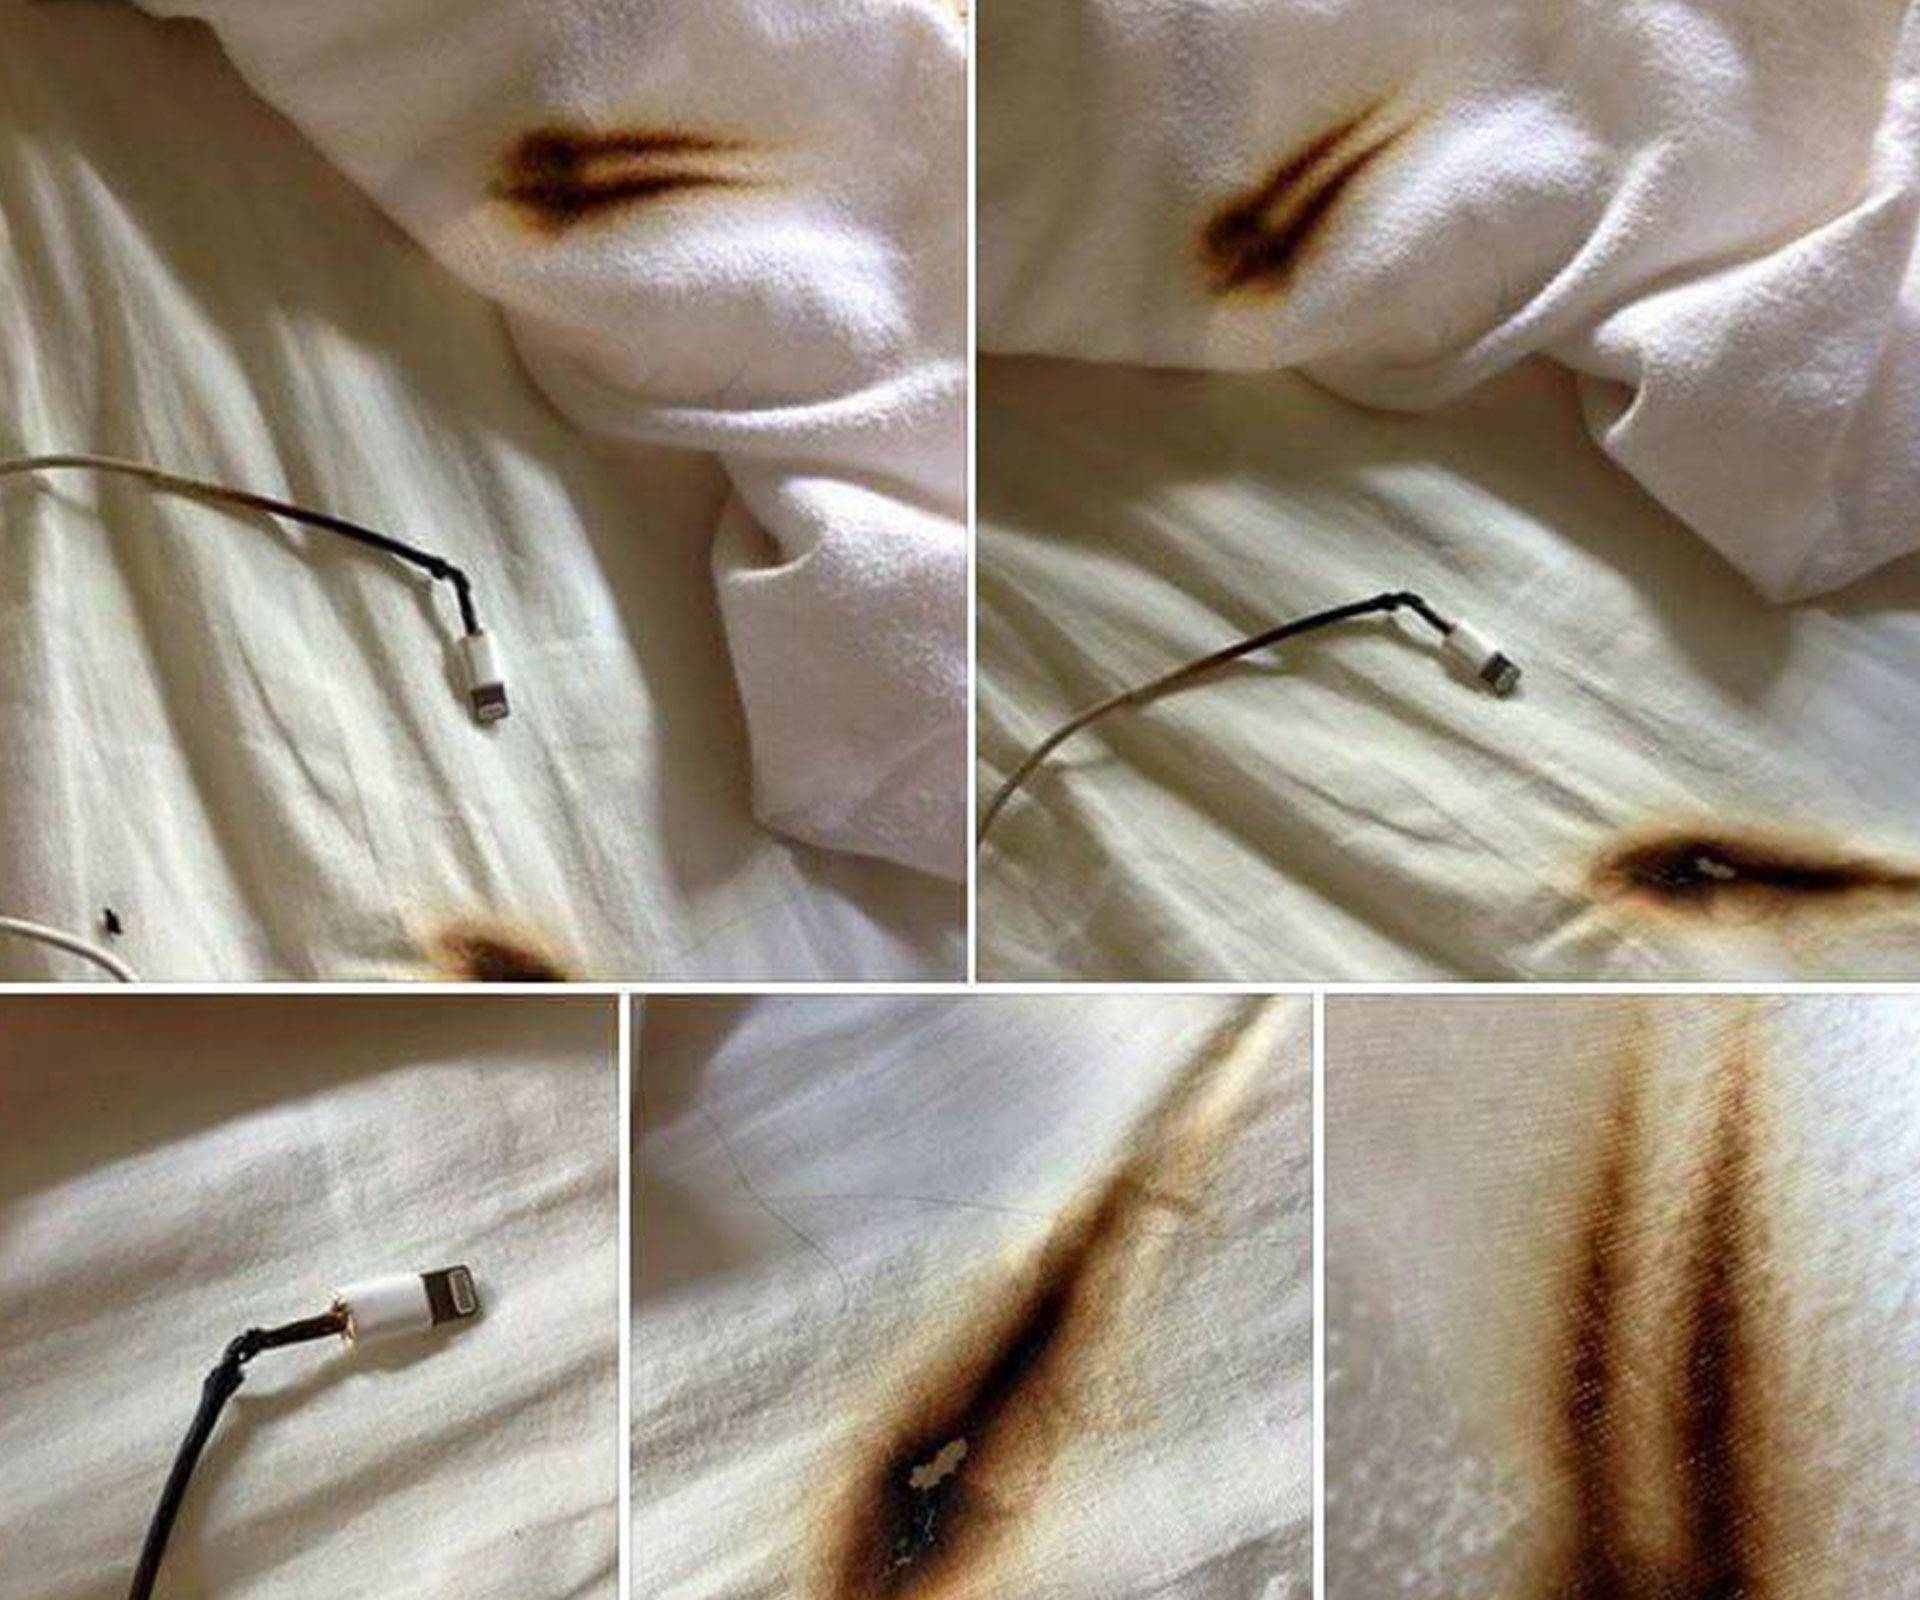 Sleeping with your phone charging under your pillow is a fire hazard